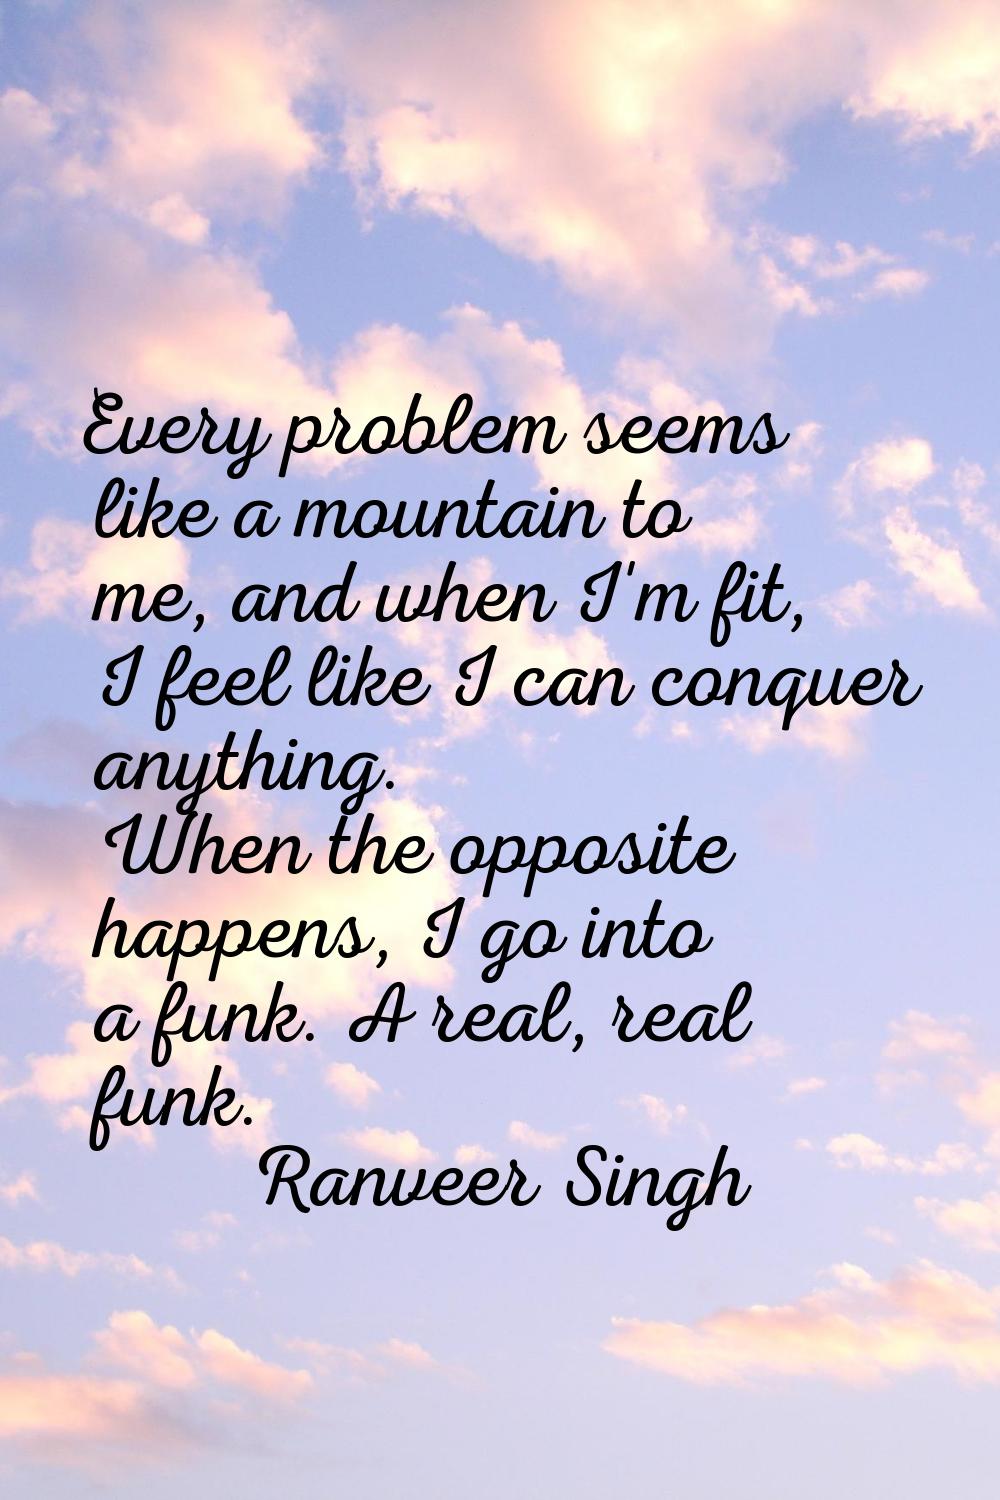 Every problem seems like a mountain to me, and when I'm fit, I feel like I can conquer anything. Wh